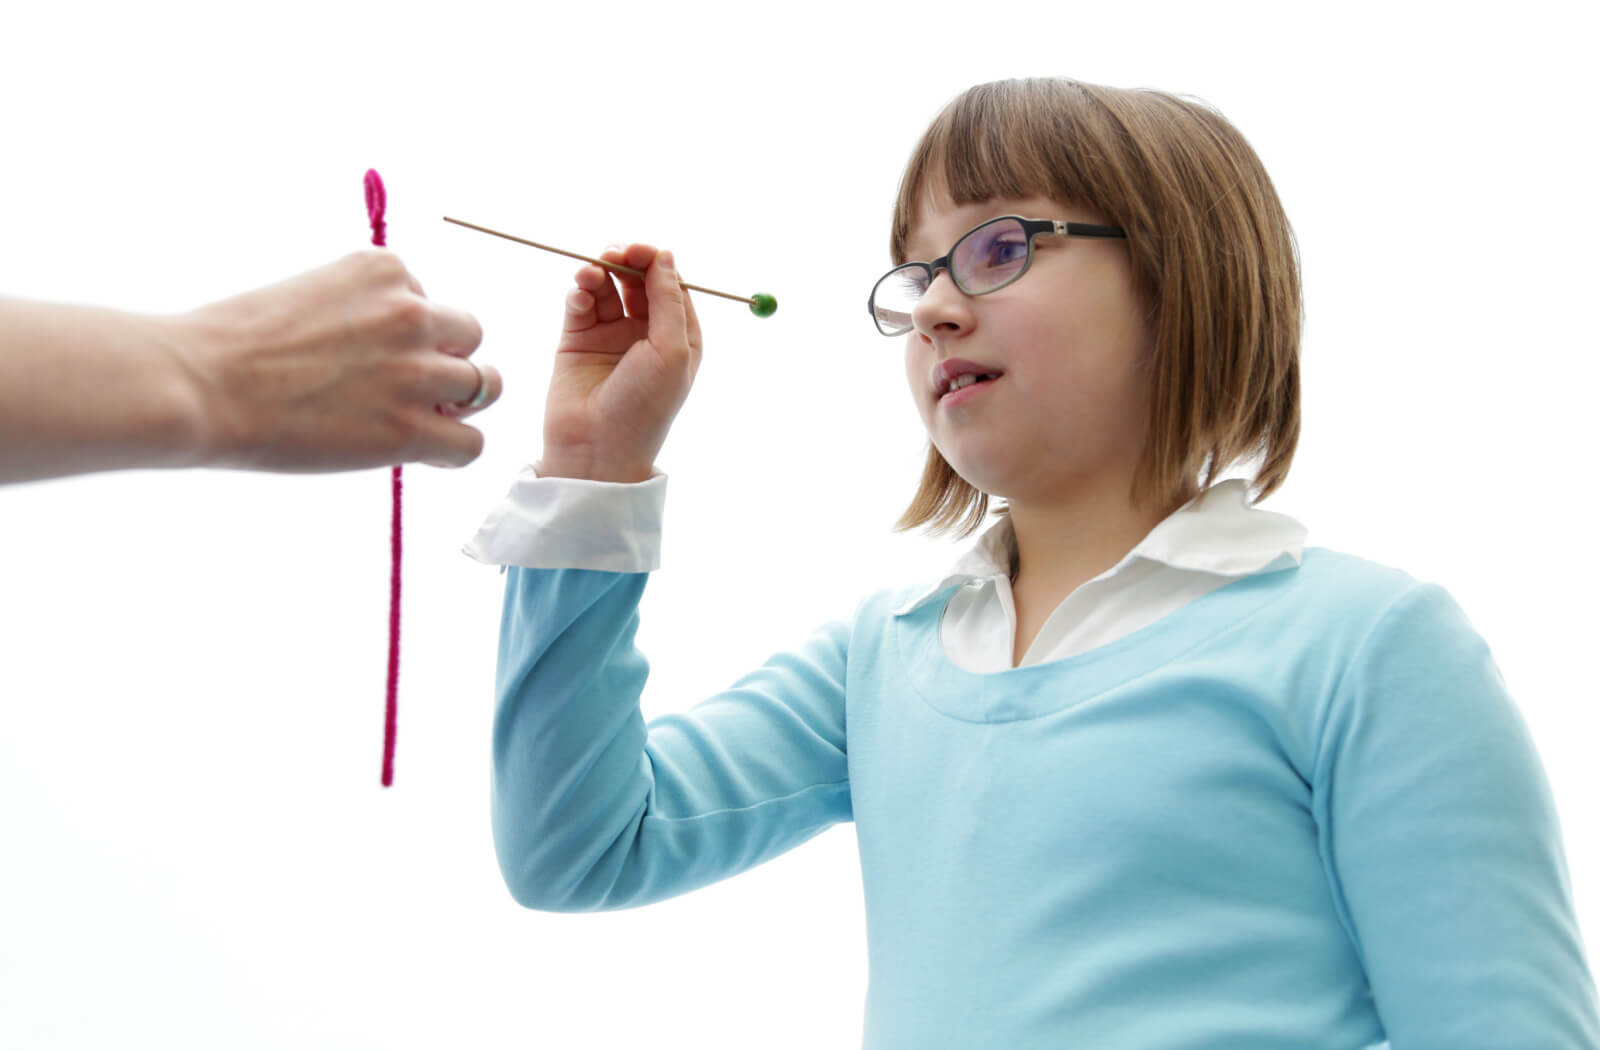 A young girl trying to insert a stick into a small hole during a vision therapy appointment.